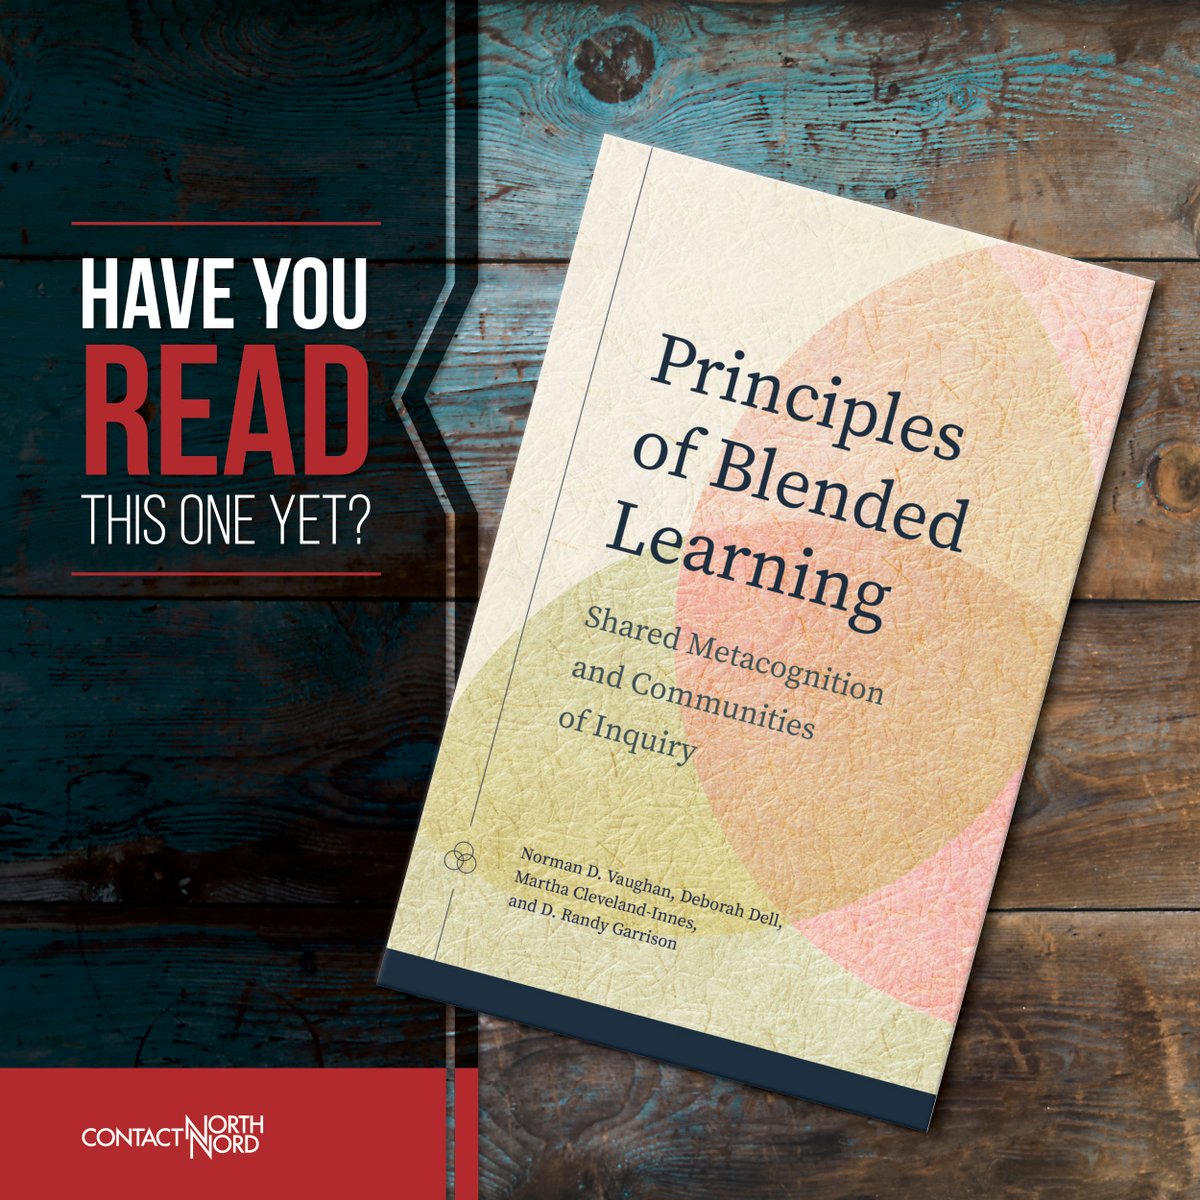 ⛵ Navigating #BlendedLearning? 'Principles of Blended Learning' offers the latest strategies & insights, emphasizing the Community of Inquiry. It's a comprehensive resource for creating inclusive, engaging educational experiences. 

👉 ow.ly/OhVn50R9lZh

@au_press